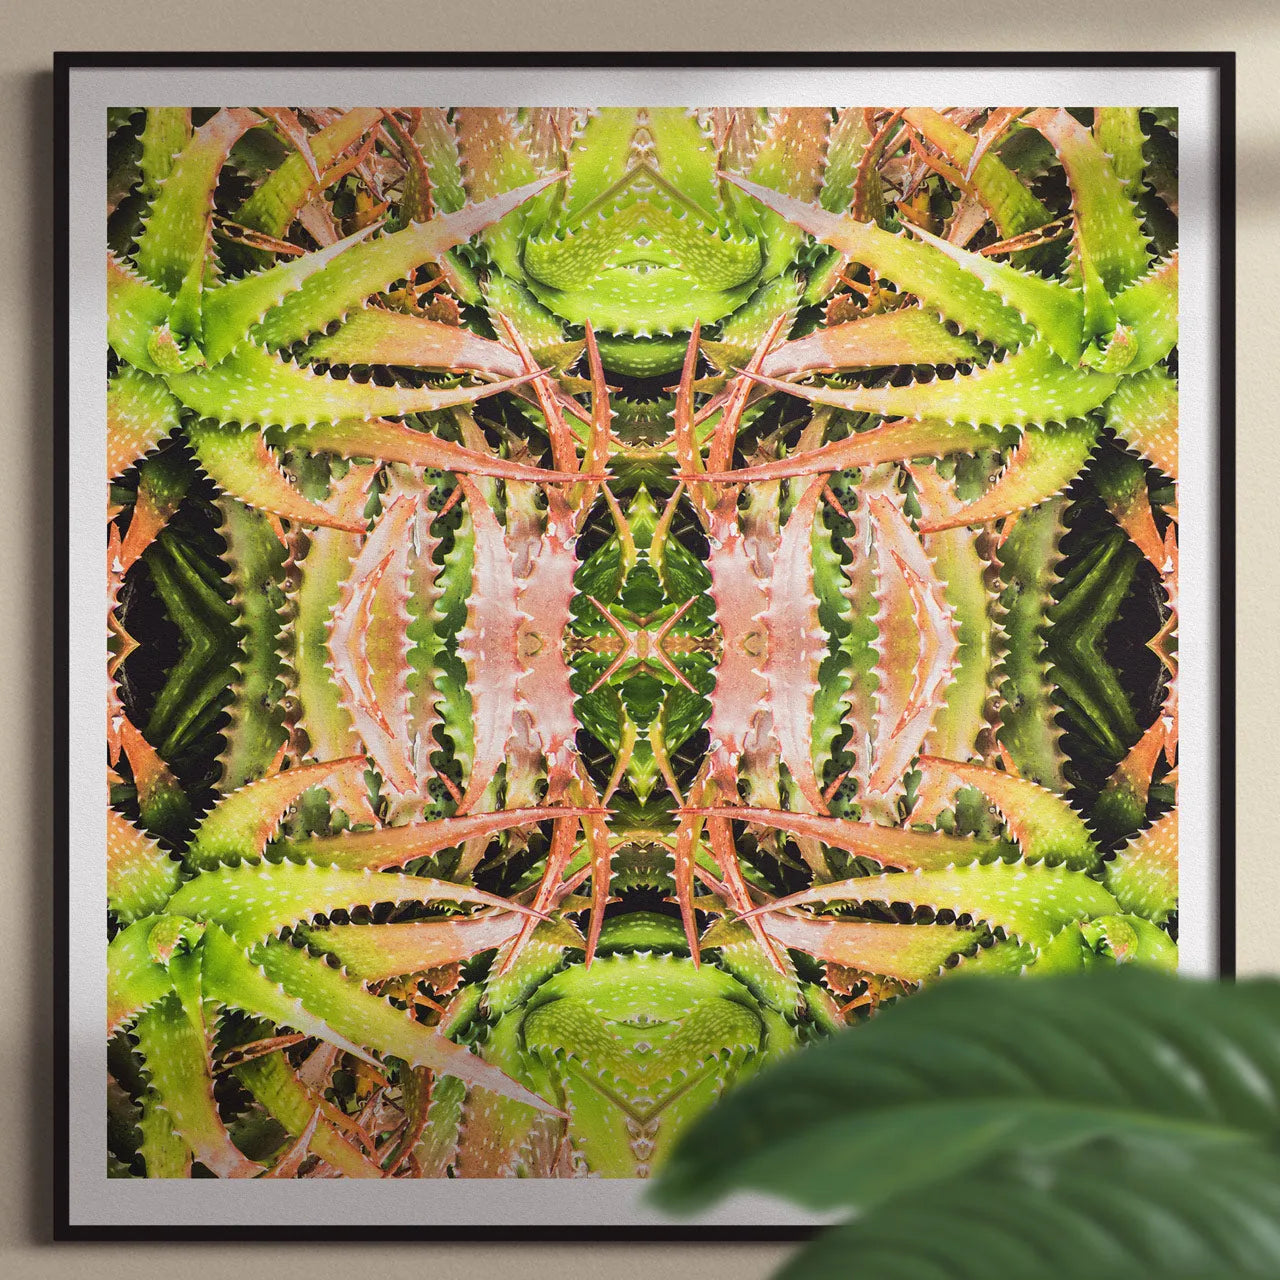 Centre Stage - Trippy Cactus Succulent Framed Art Print - Posters Prints & Visual Artwork - Aesthetic Art